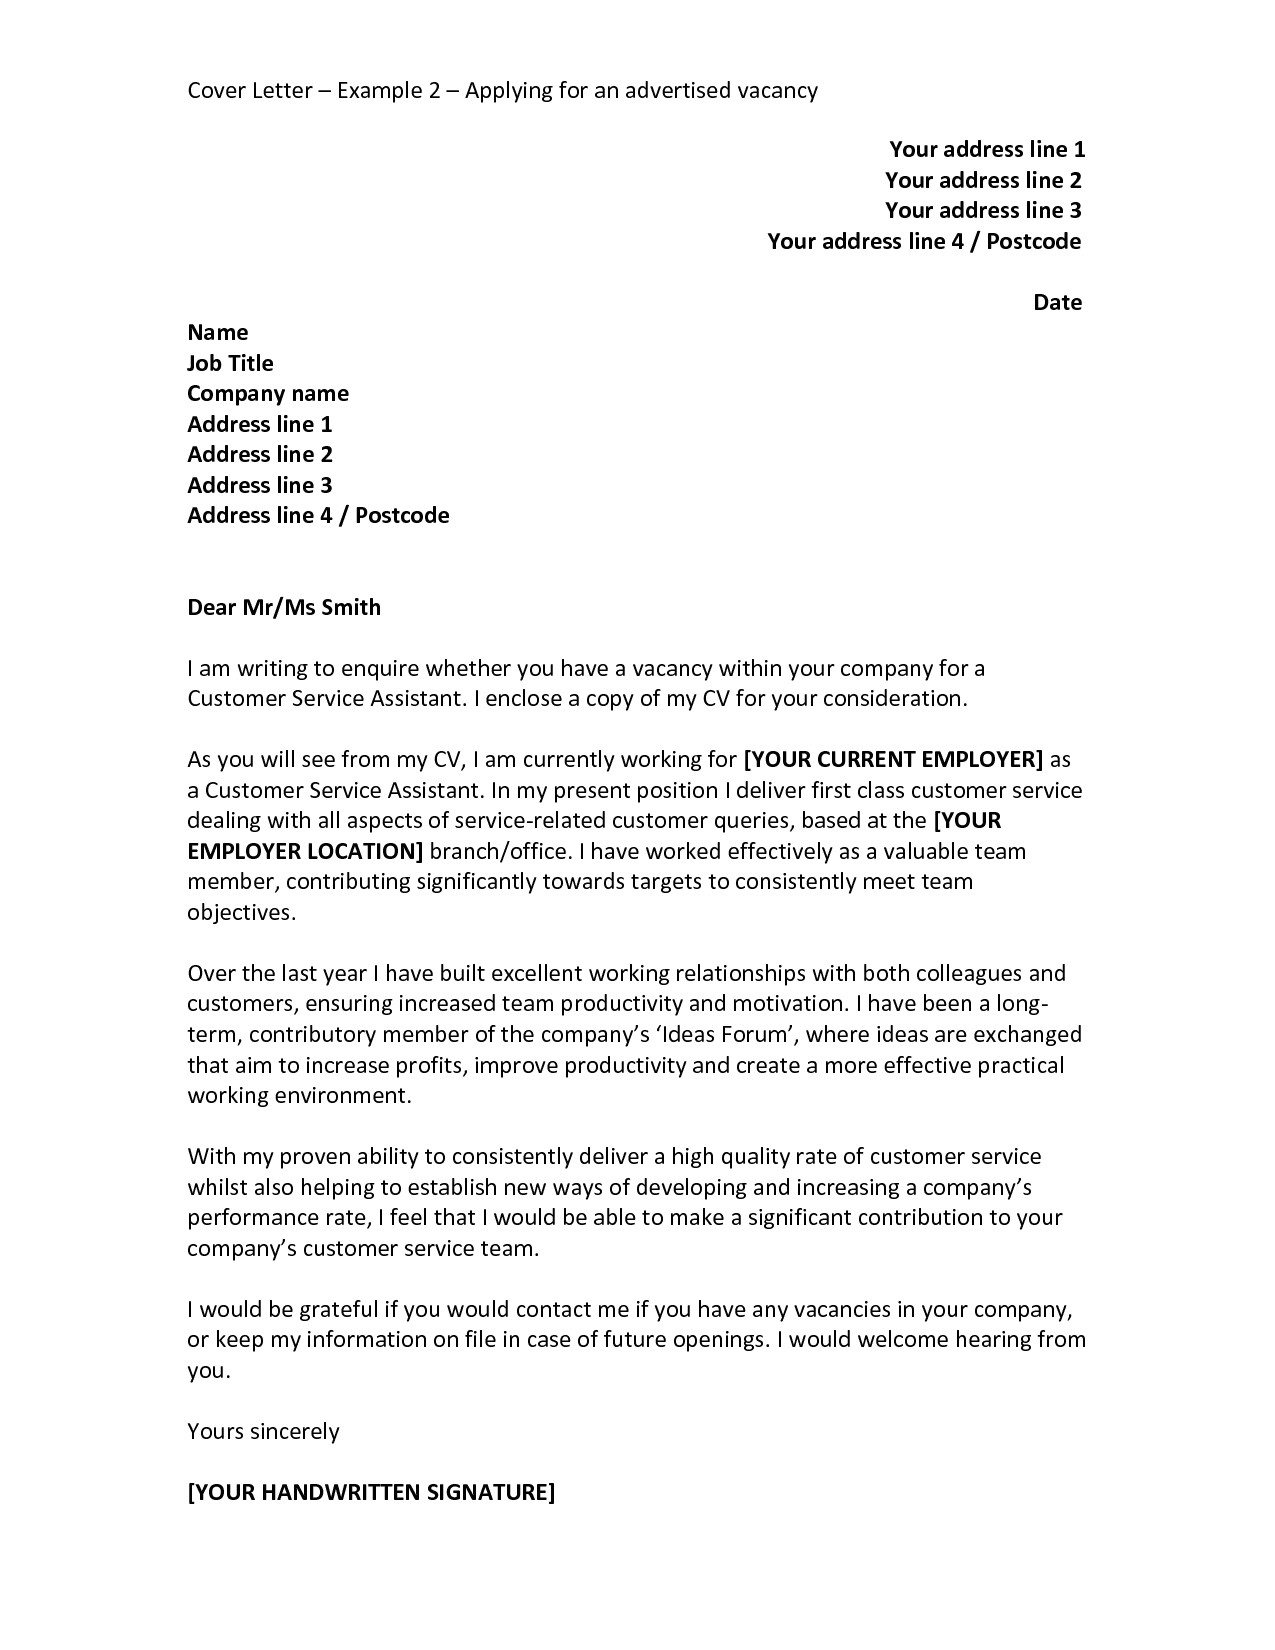 internal job transfer request letter example